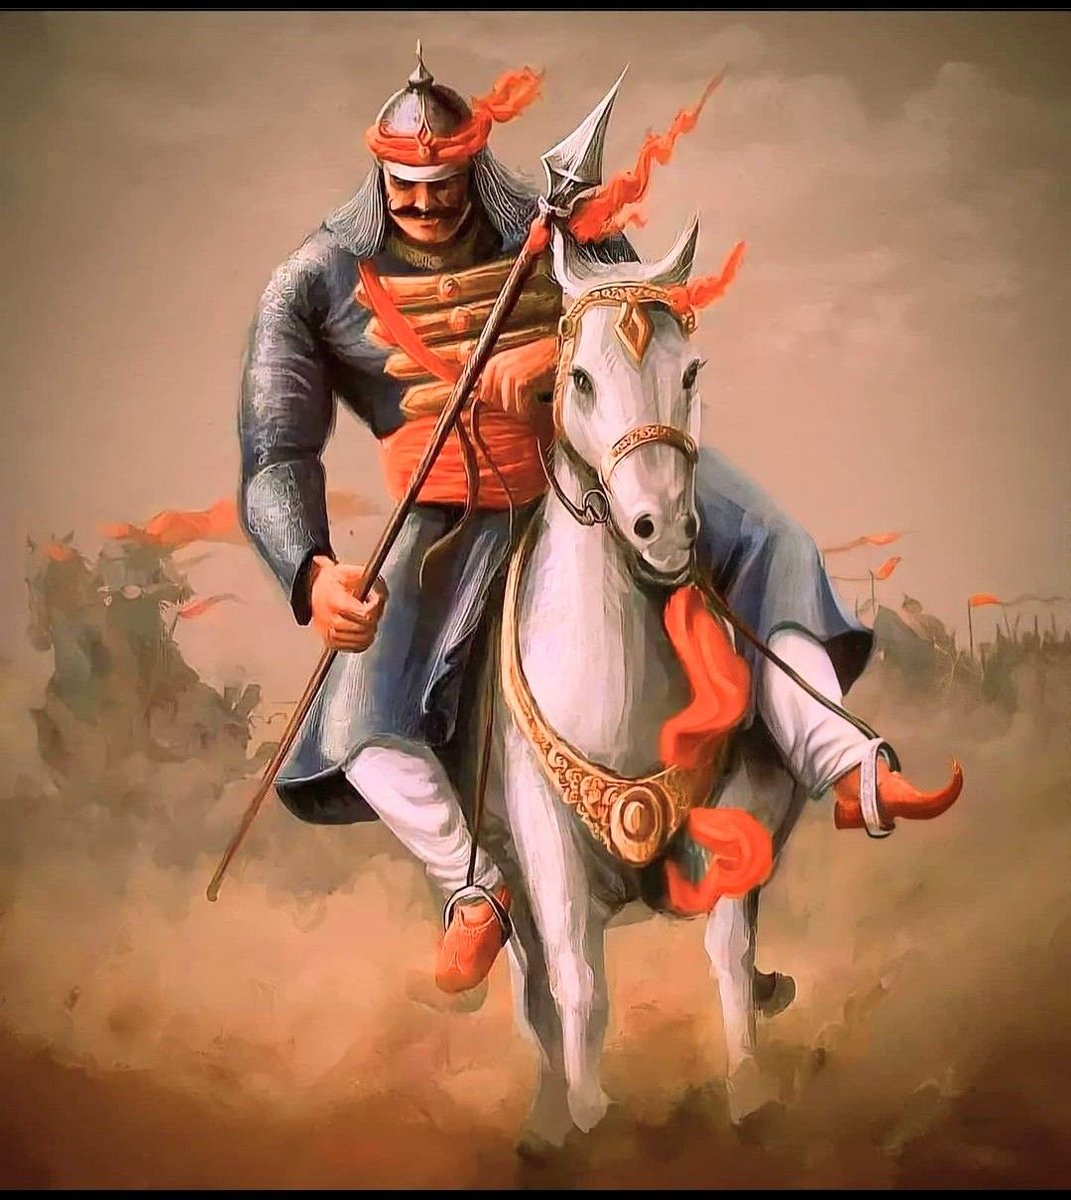 Today is Maharana Pratap's Jayanti. While we have all heard his stories, our textbooks don't do justice to this legendary warrior and saviour of Hindu Dharma. But why should we remember Pratap? What did he do? Fight Akbar and lost at Haldighati? What is the big deal? What…